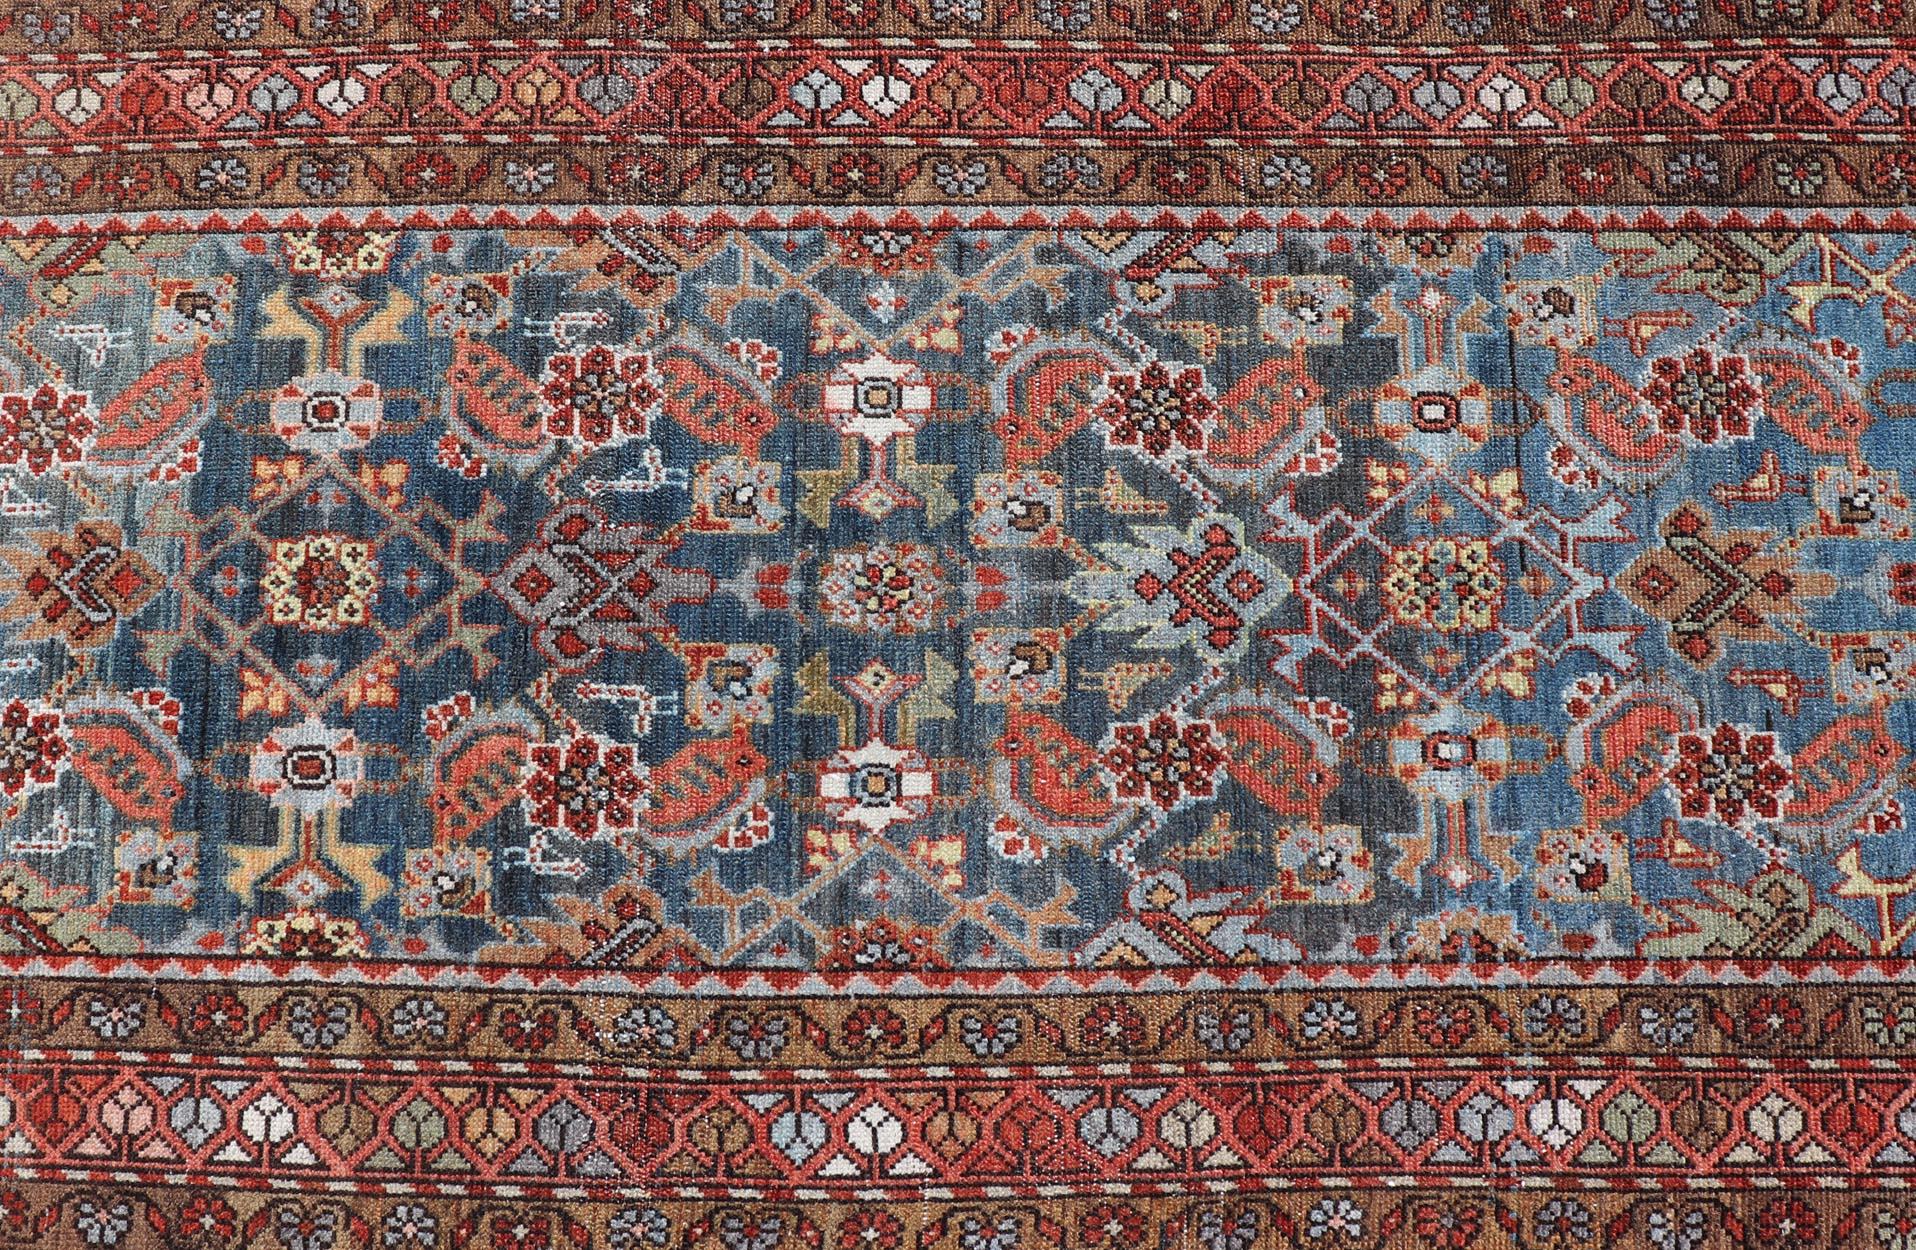 N.W. Persian Antique Runner with Geometric Florals Set on a Blue Field For Sale 2